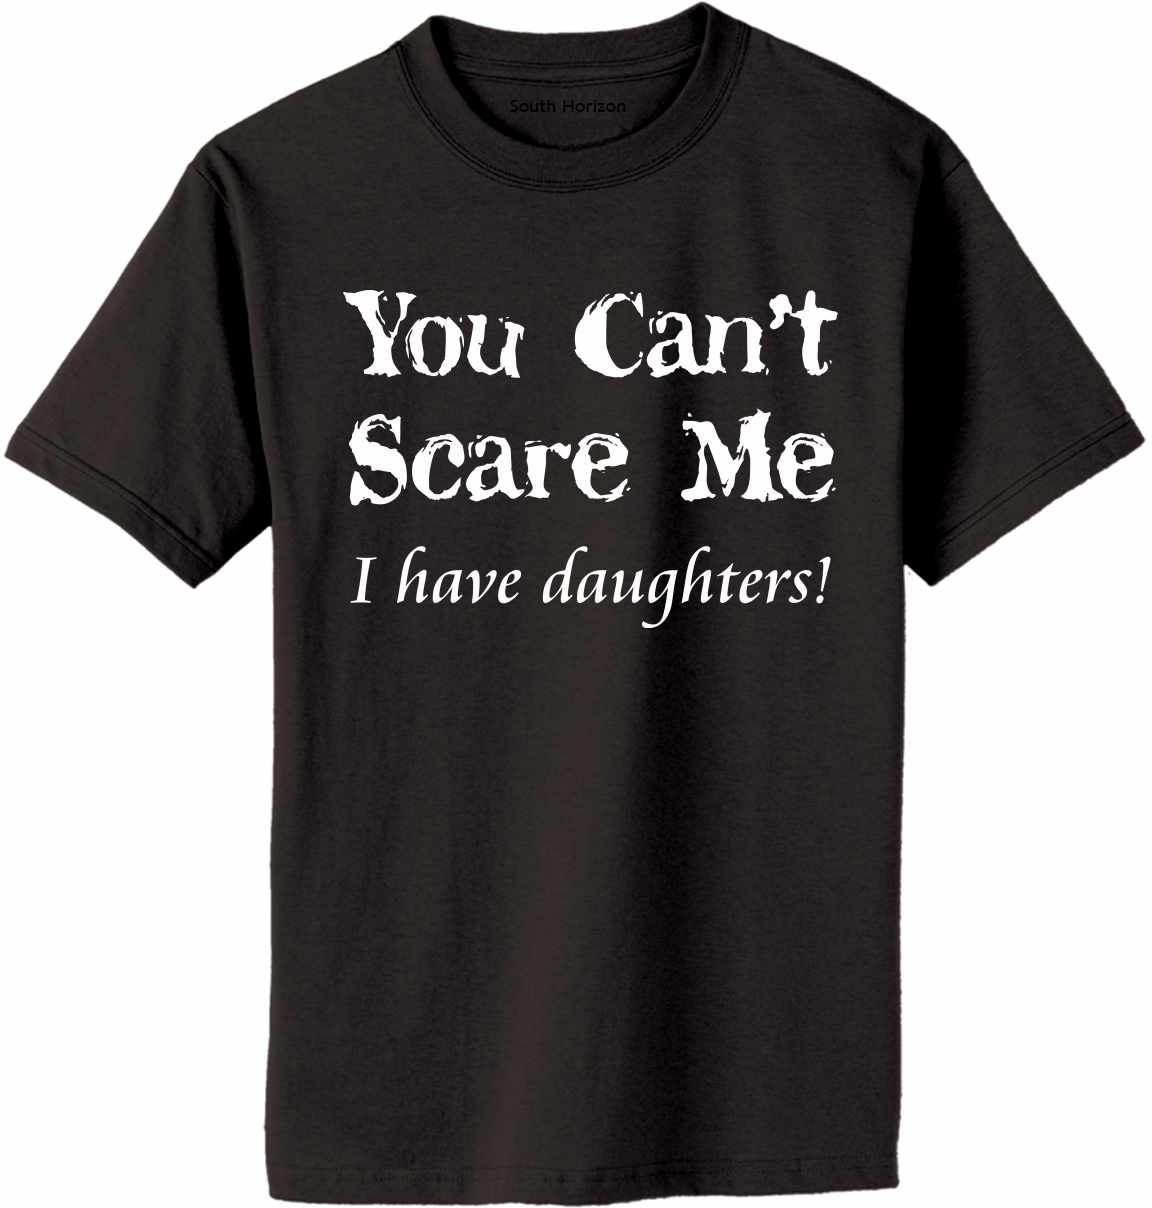 You Can't Scare Me, I have Daughters! Adult T-Shirt (#763-1)